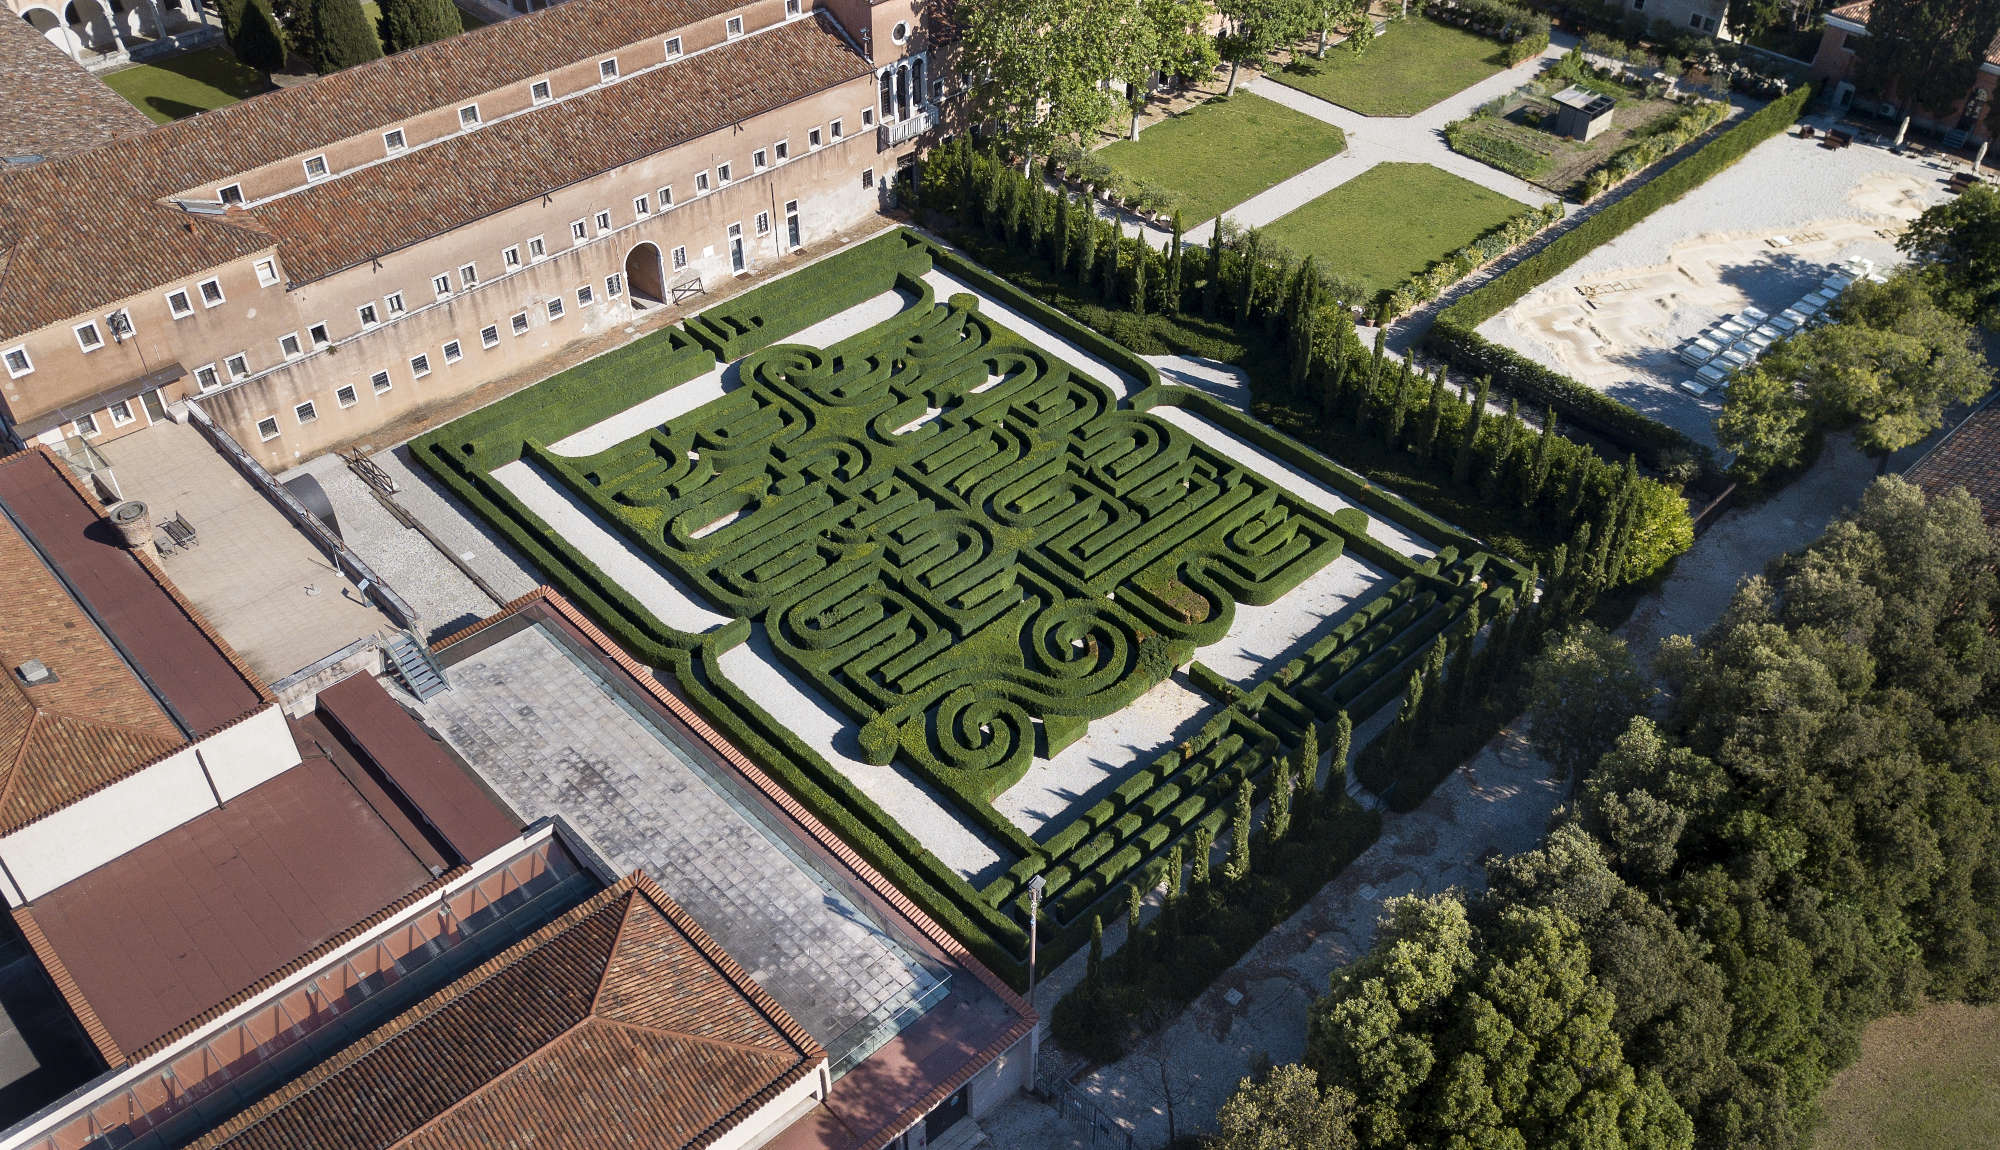 View of the Borges Labyrinth on the island of San Giorgio in Venice. The hedges form Borges' name. Photo: Matteo De Fina